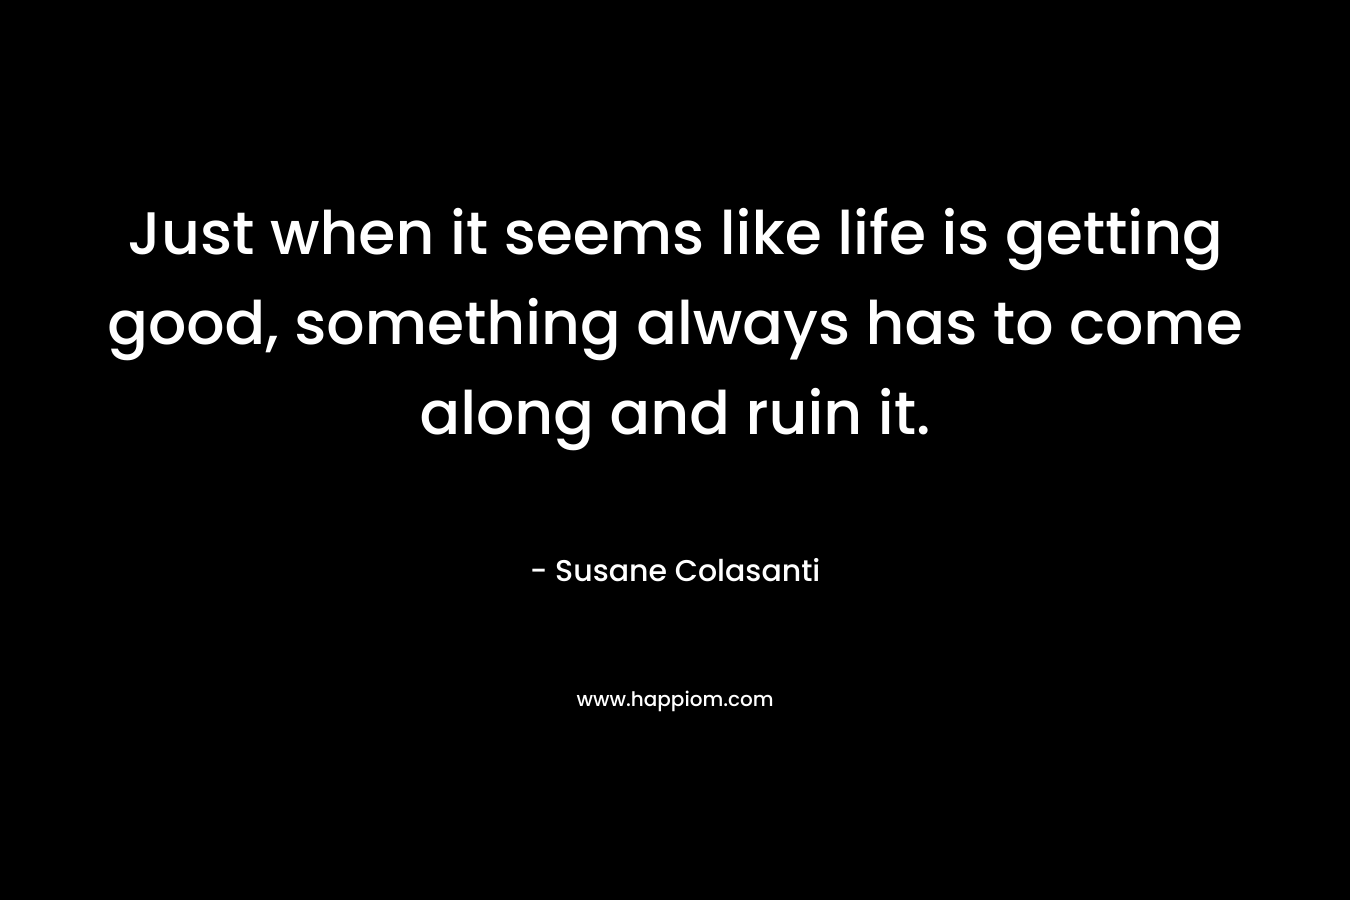 Just when it seems like life is getting good, something always has to come along and ruin it. – Susane Colasanti